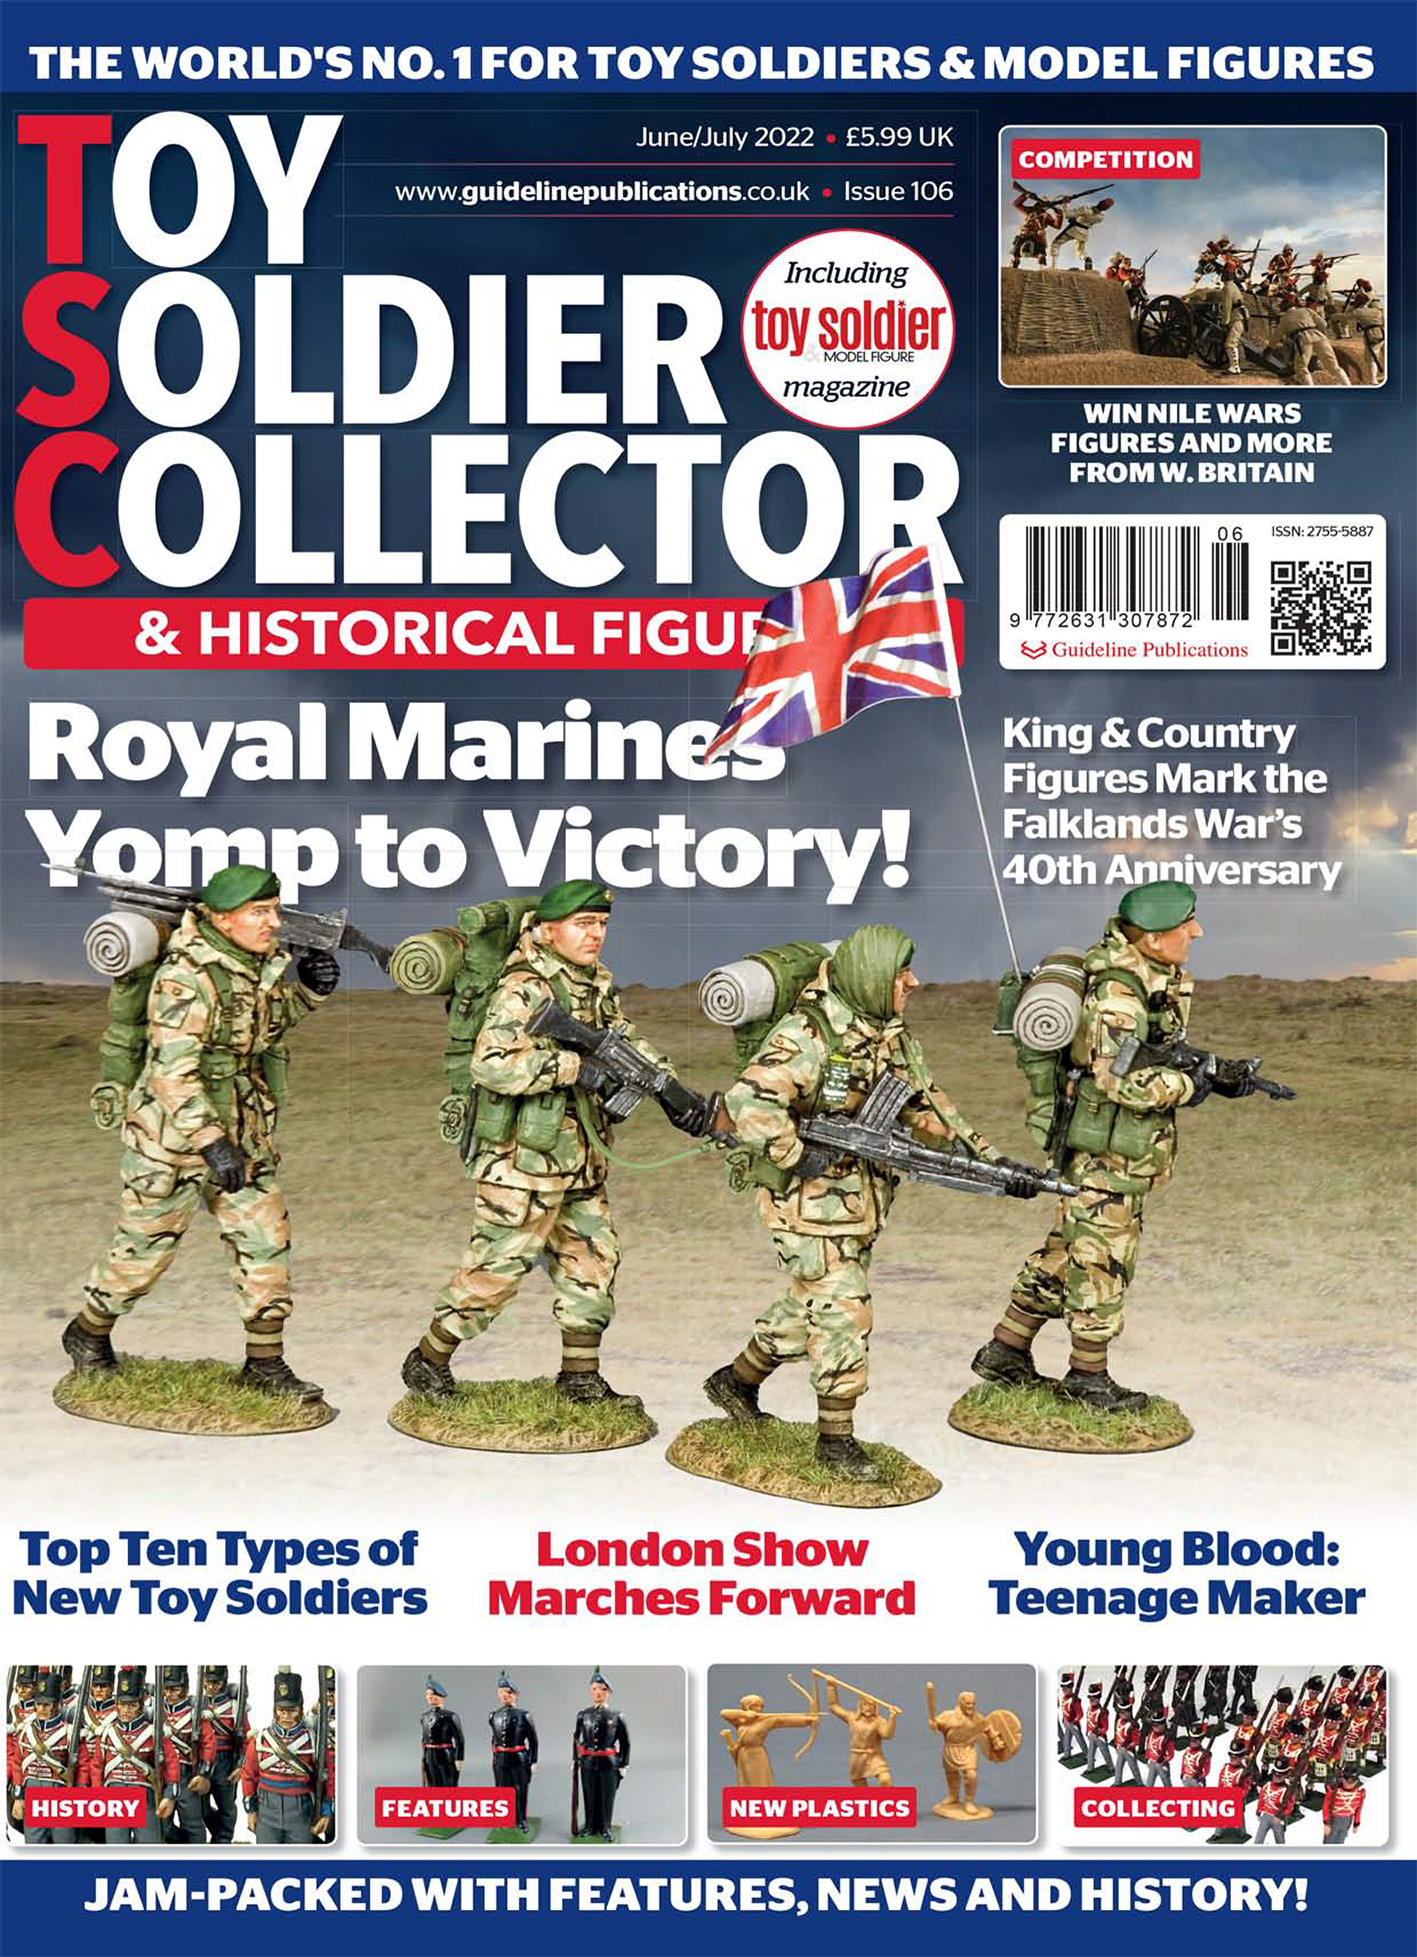 Guideline Publications Toy Soldier Collector #106 